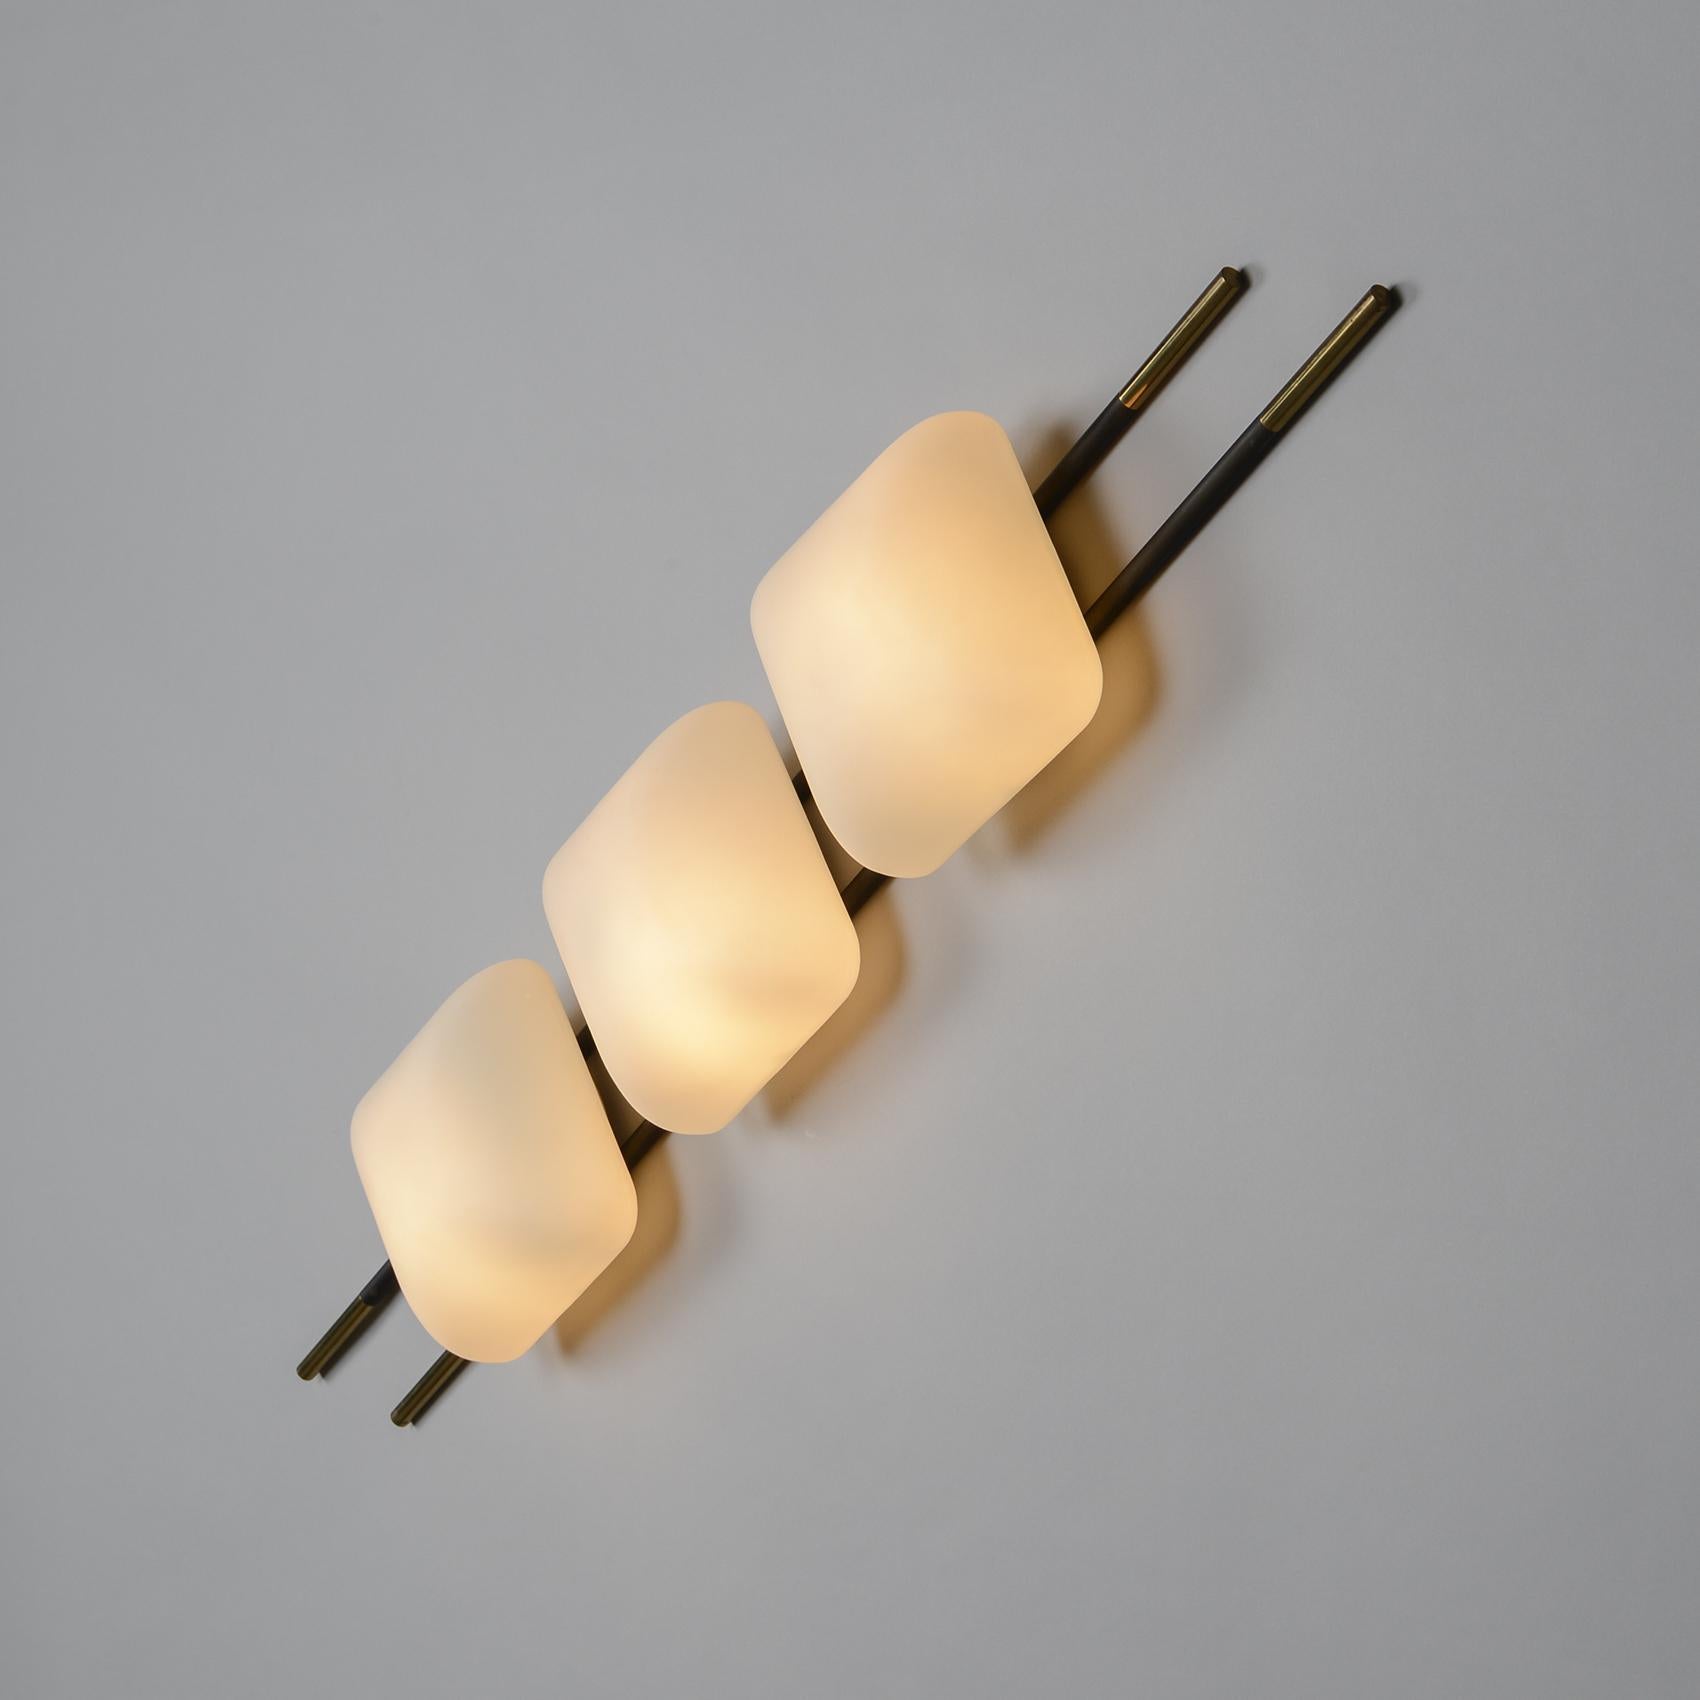 Large three-light wall sconce, dating back to the 1950s and created by the french manufacturer Maison Lunel.

We like the elegance of the structure, composed of wooden and brass rods, which holds three opaline glass reflectors, diffusing a soft